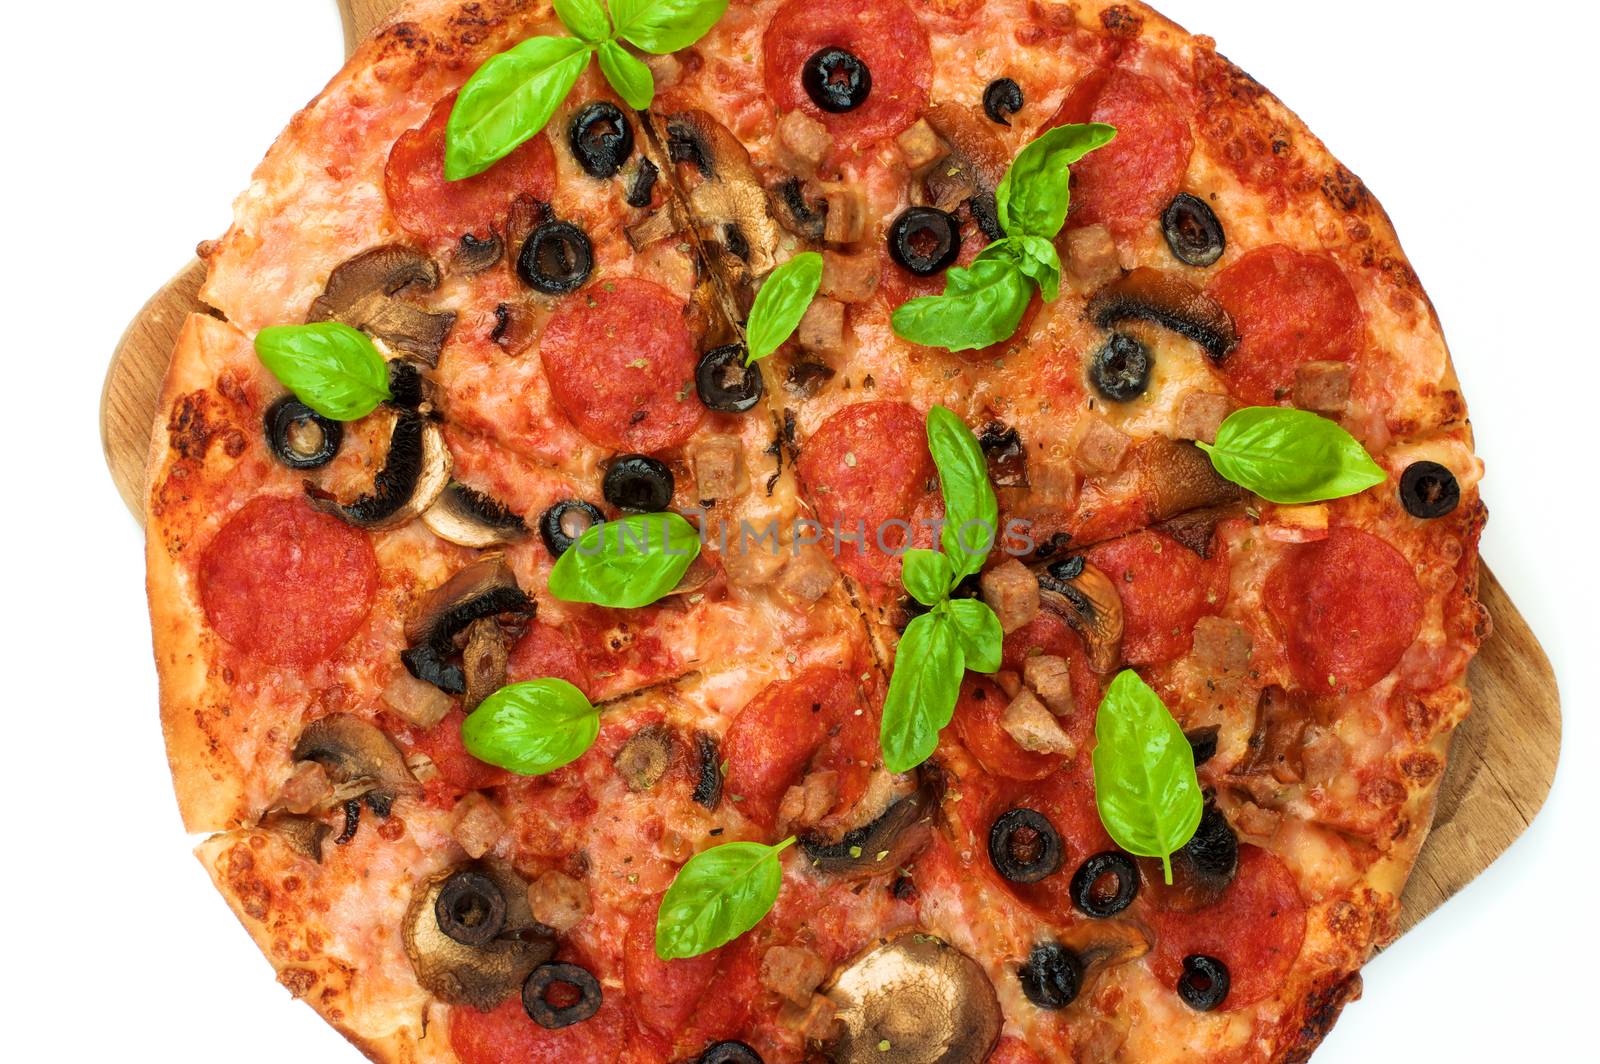 Pepperoni and Mushrooms Pizza by zhekos